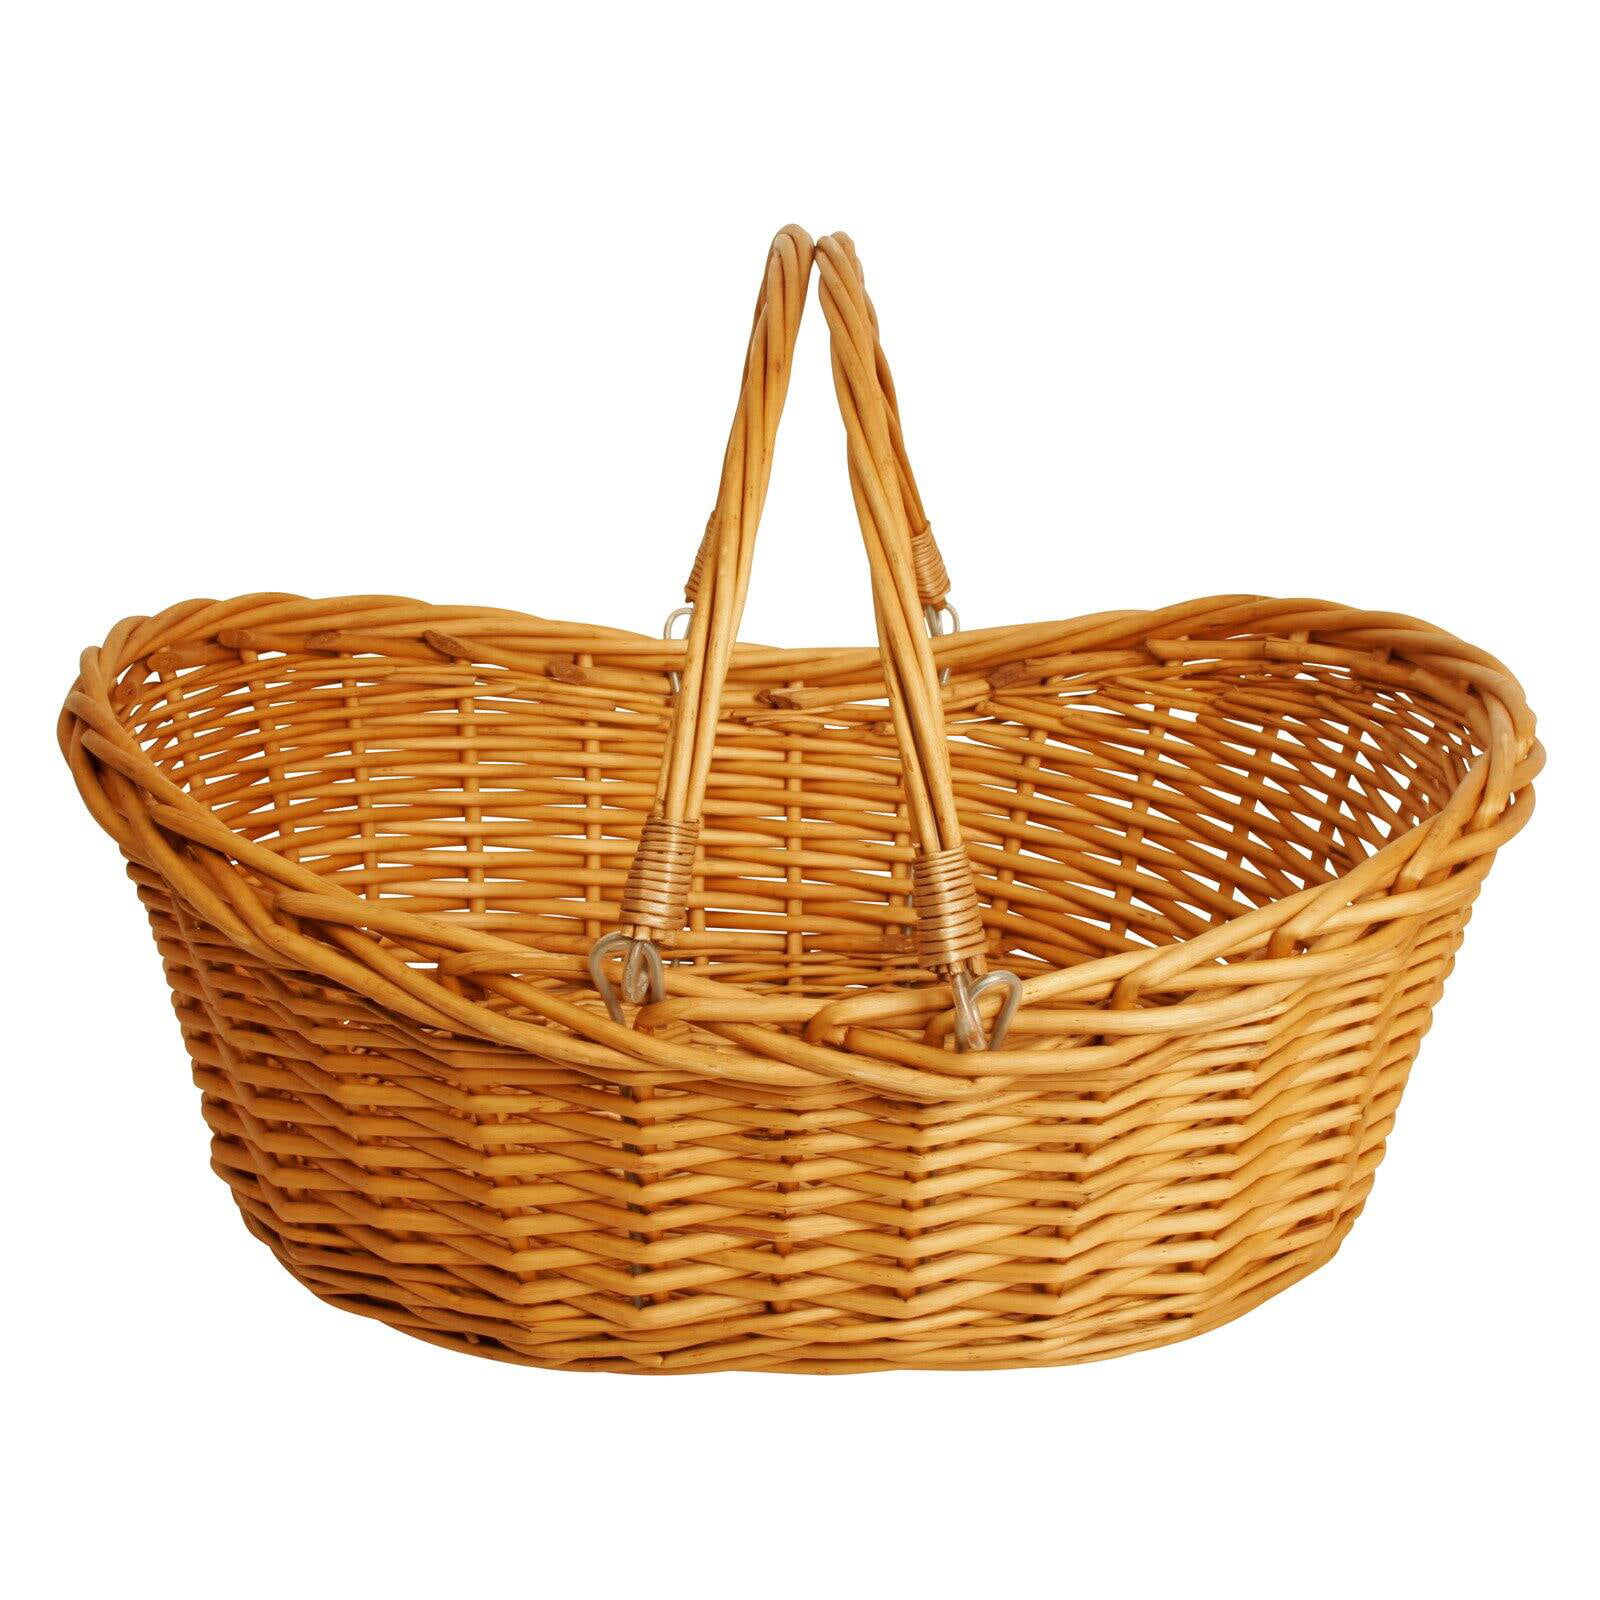 Oval Antique Style Willow Wicker Picnic Outdoor Shopping Storage Basket W/Handle 